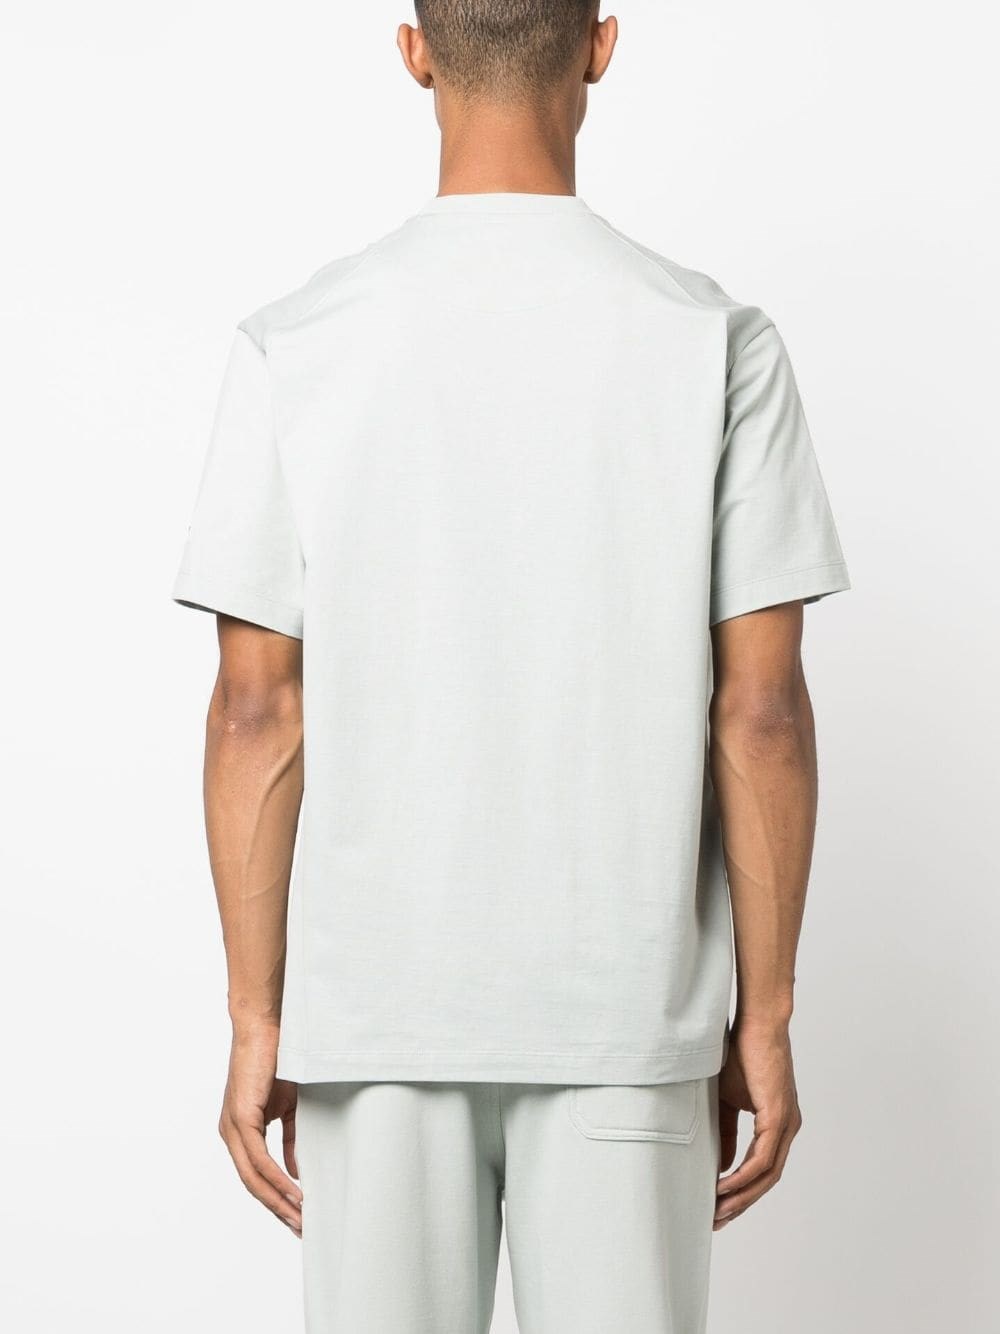 y-3 T-SHIRT available on montiboutique.com - 56789